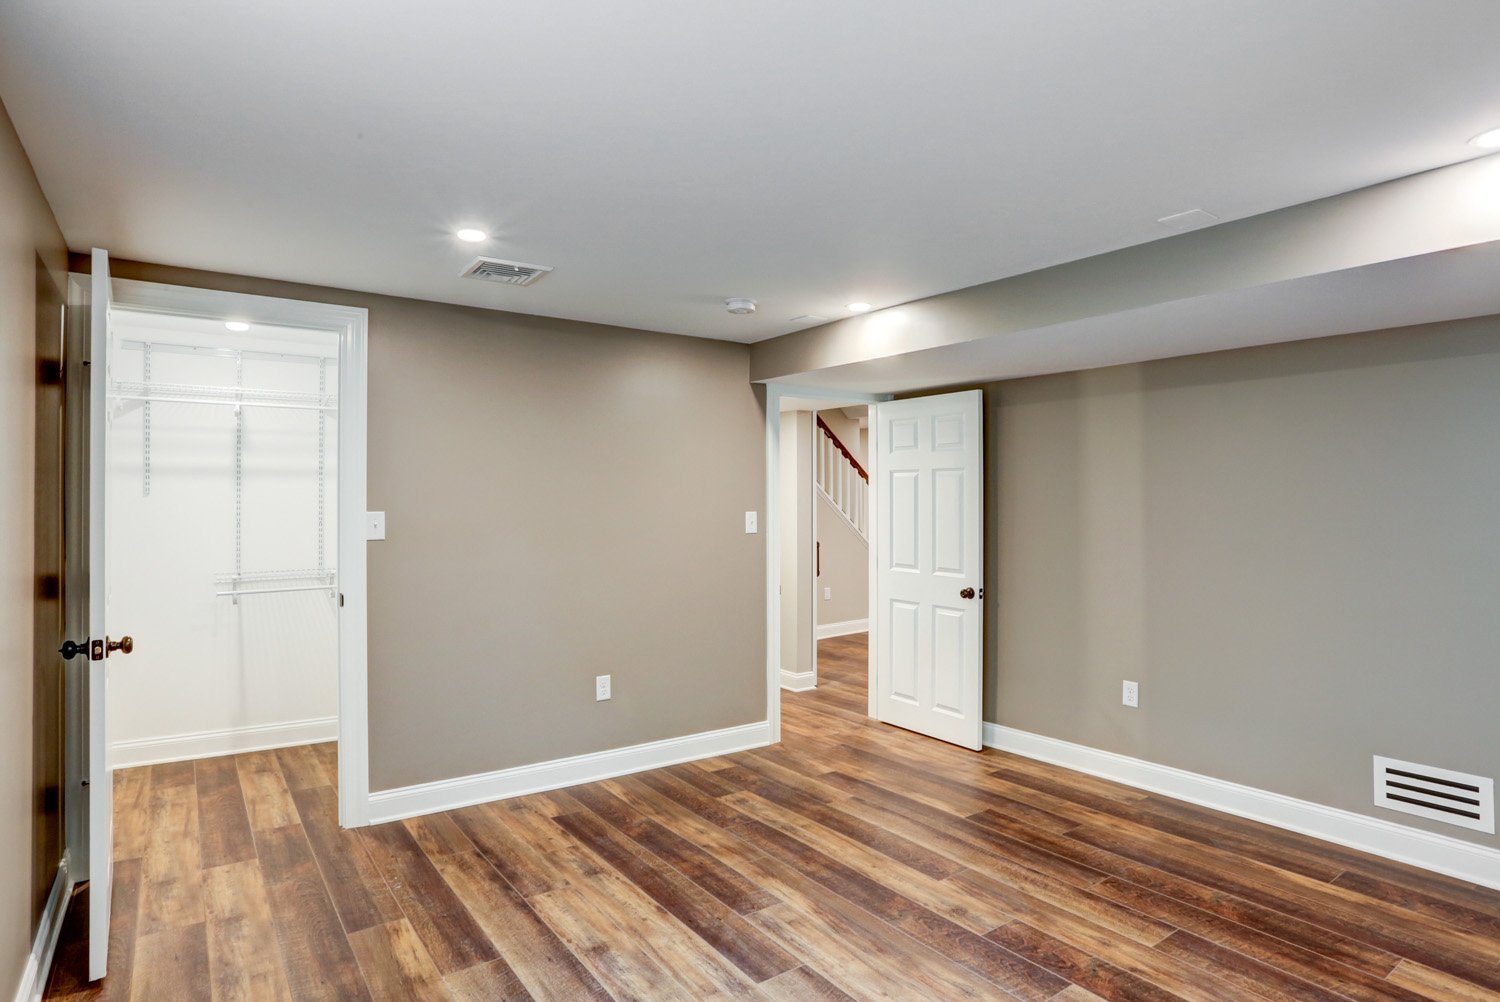 Lititz Basement Remodel with additional rooms